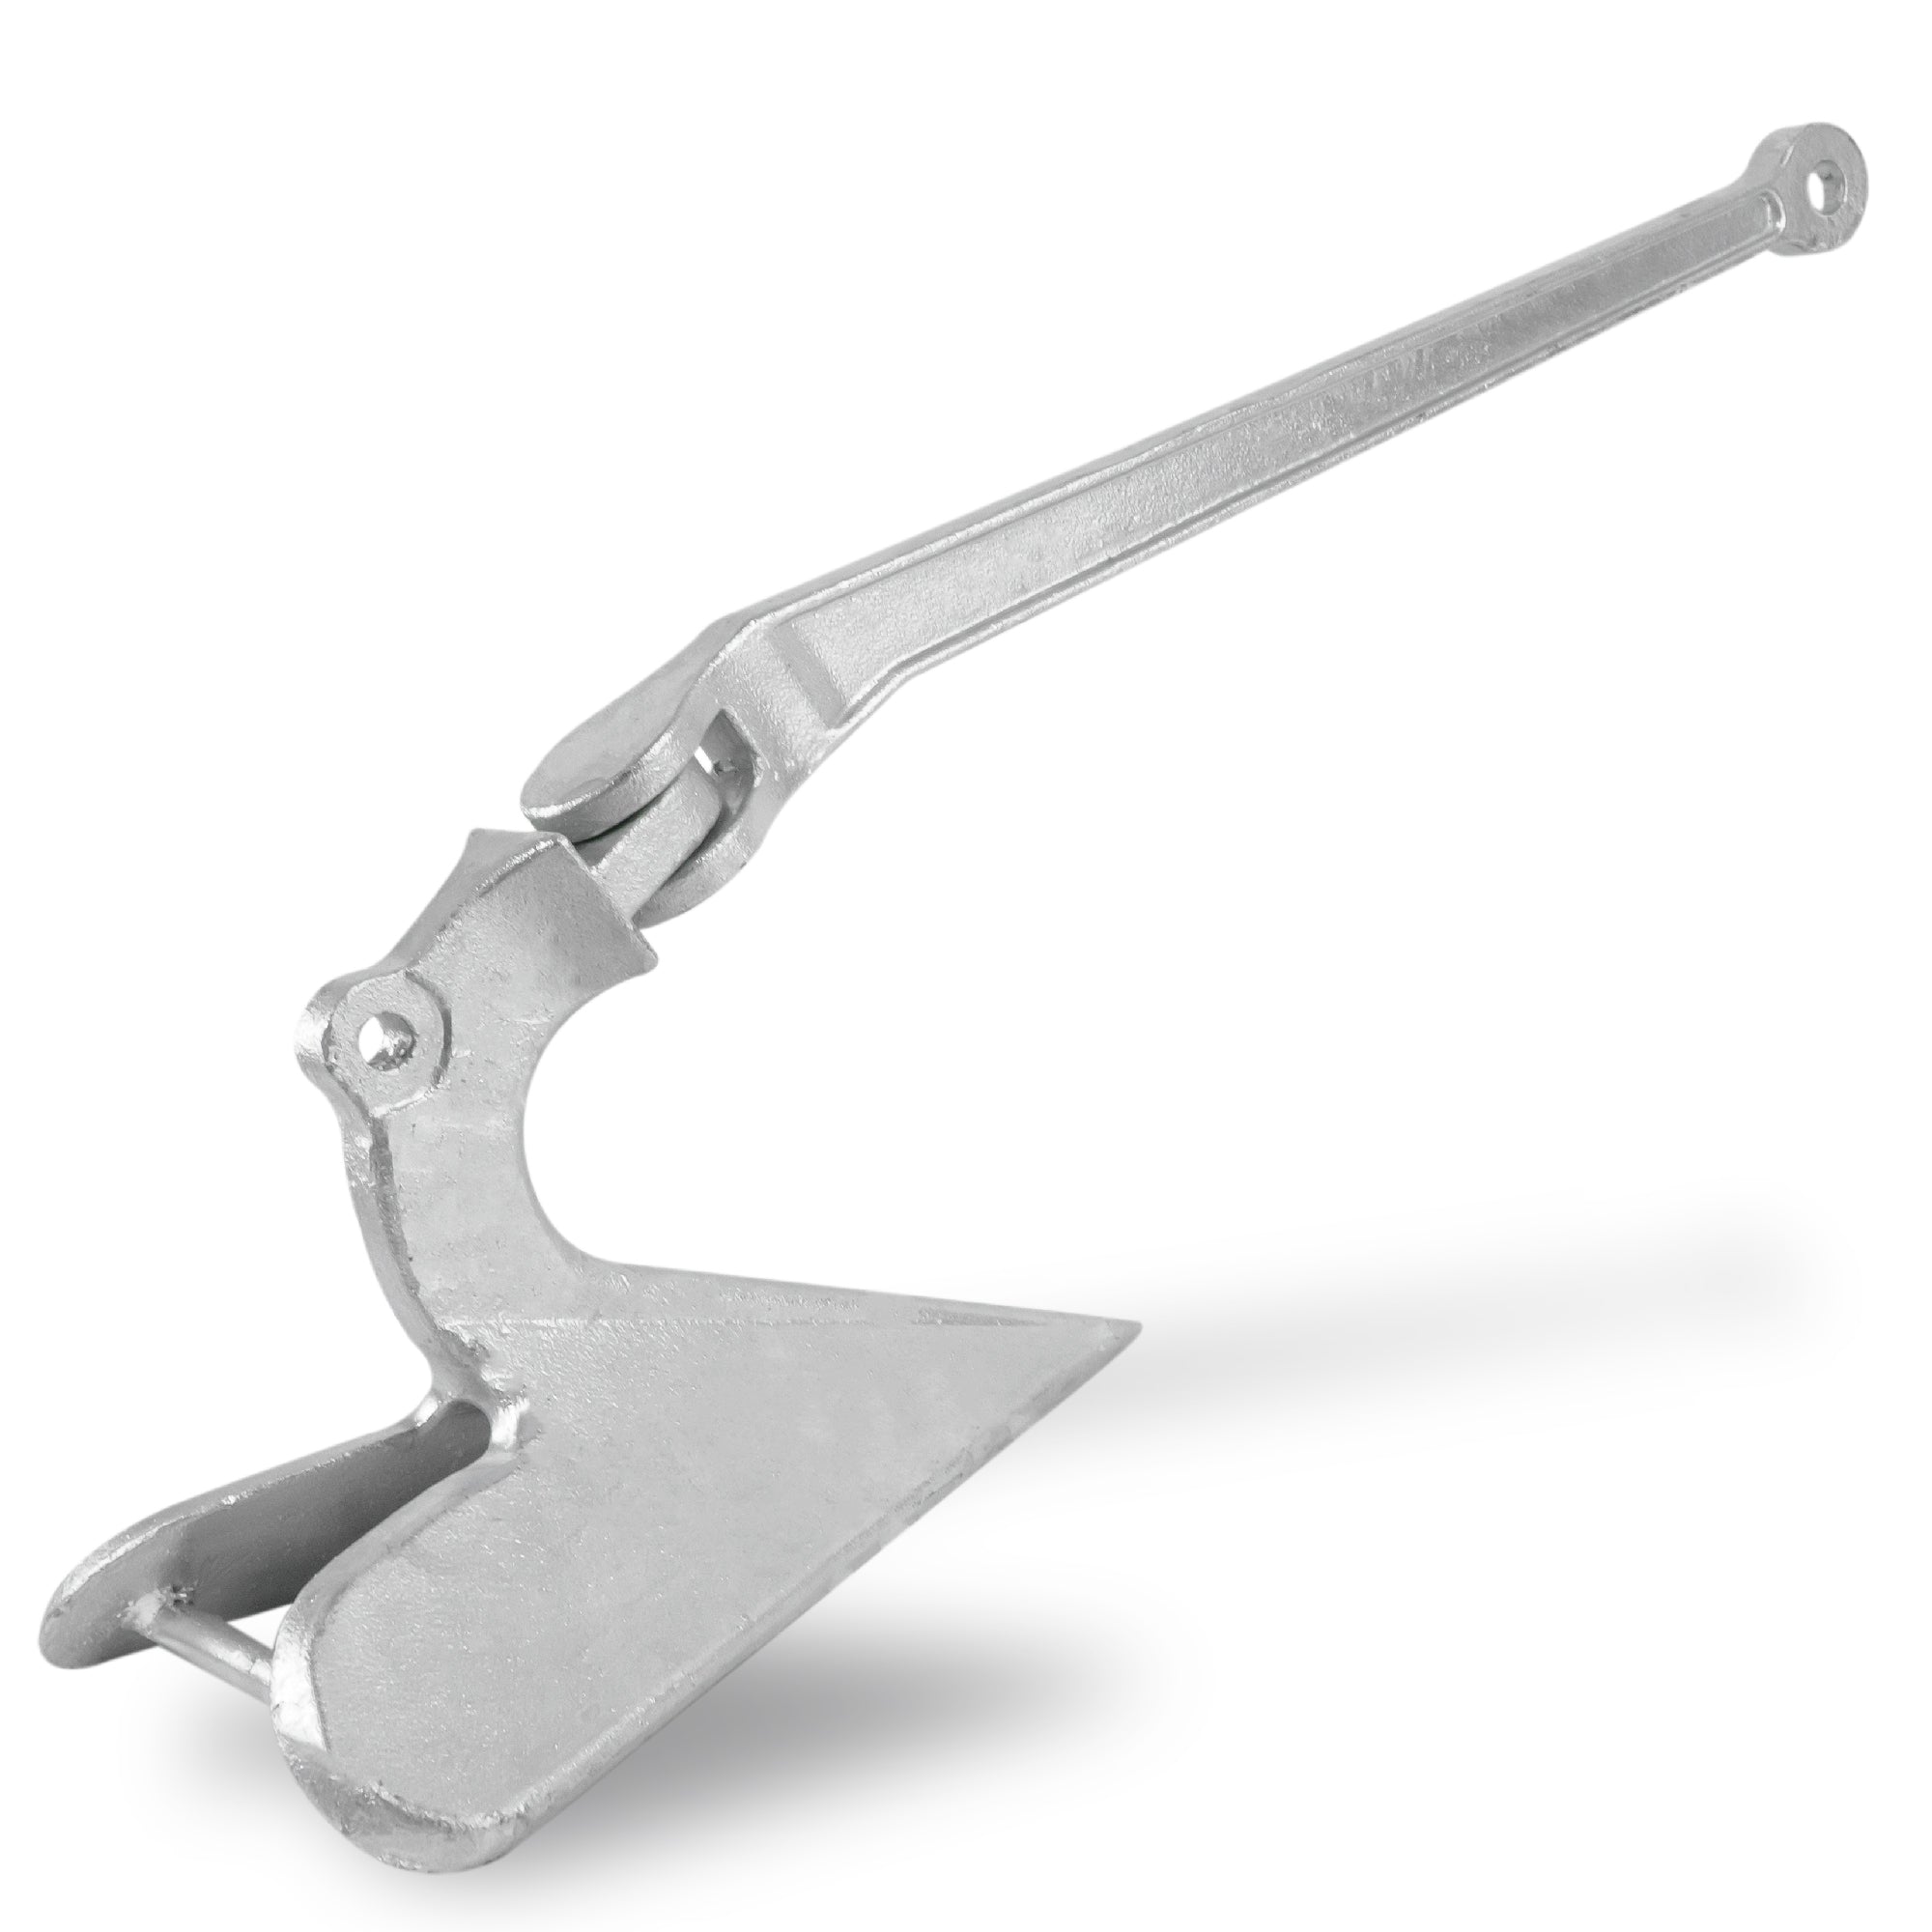 CQR Style Plow Anchor,  20 Lb / 9 Kg, Hot Dipped Galvanized Steel - FO350